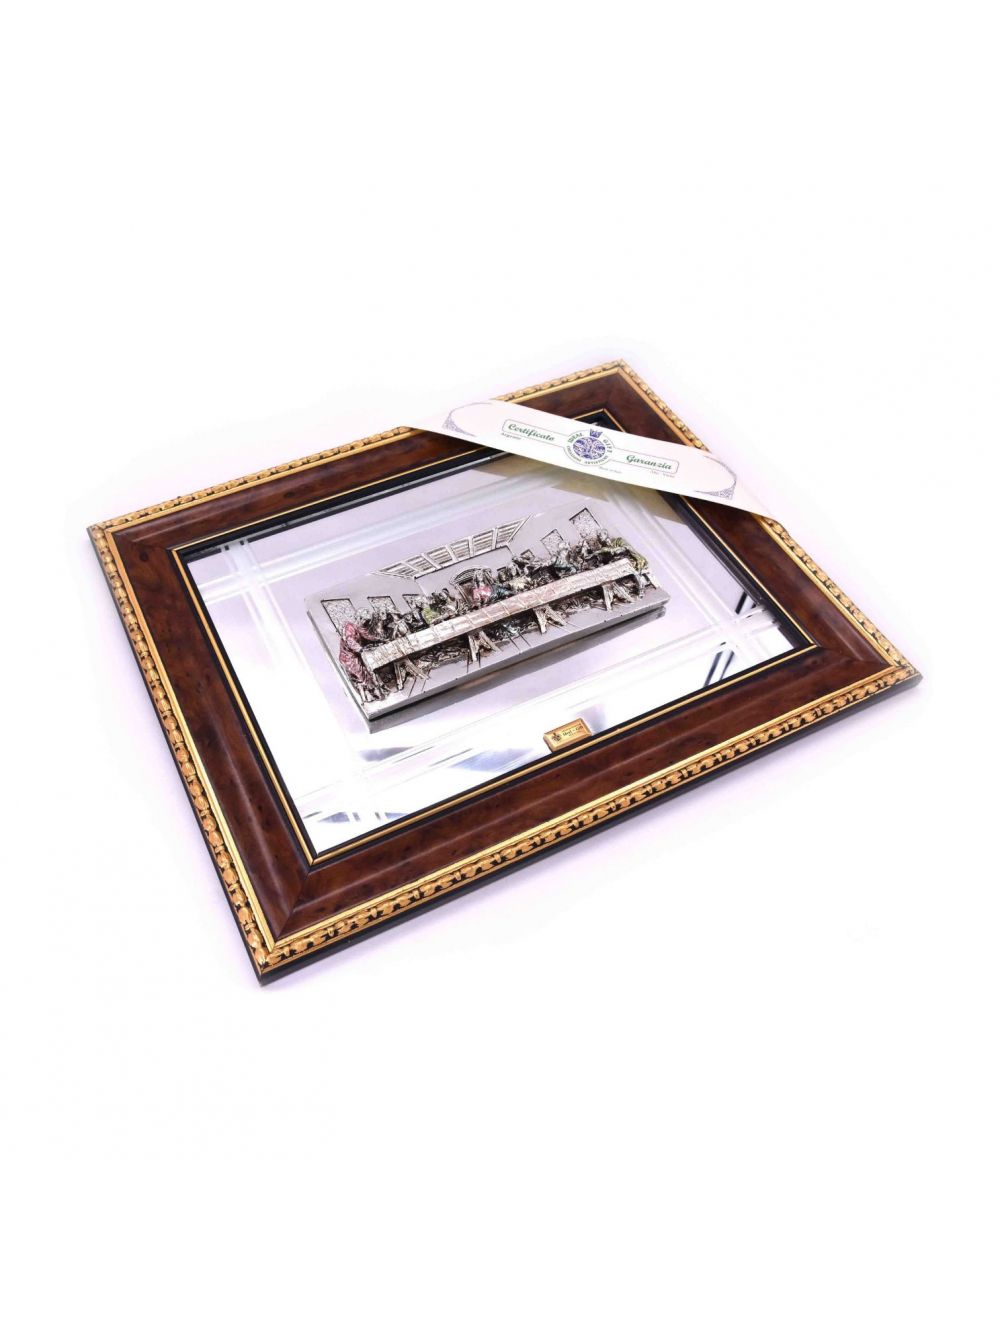 Photo Frame With Wooden Color Border Assorted 
48 cm x 36 cm